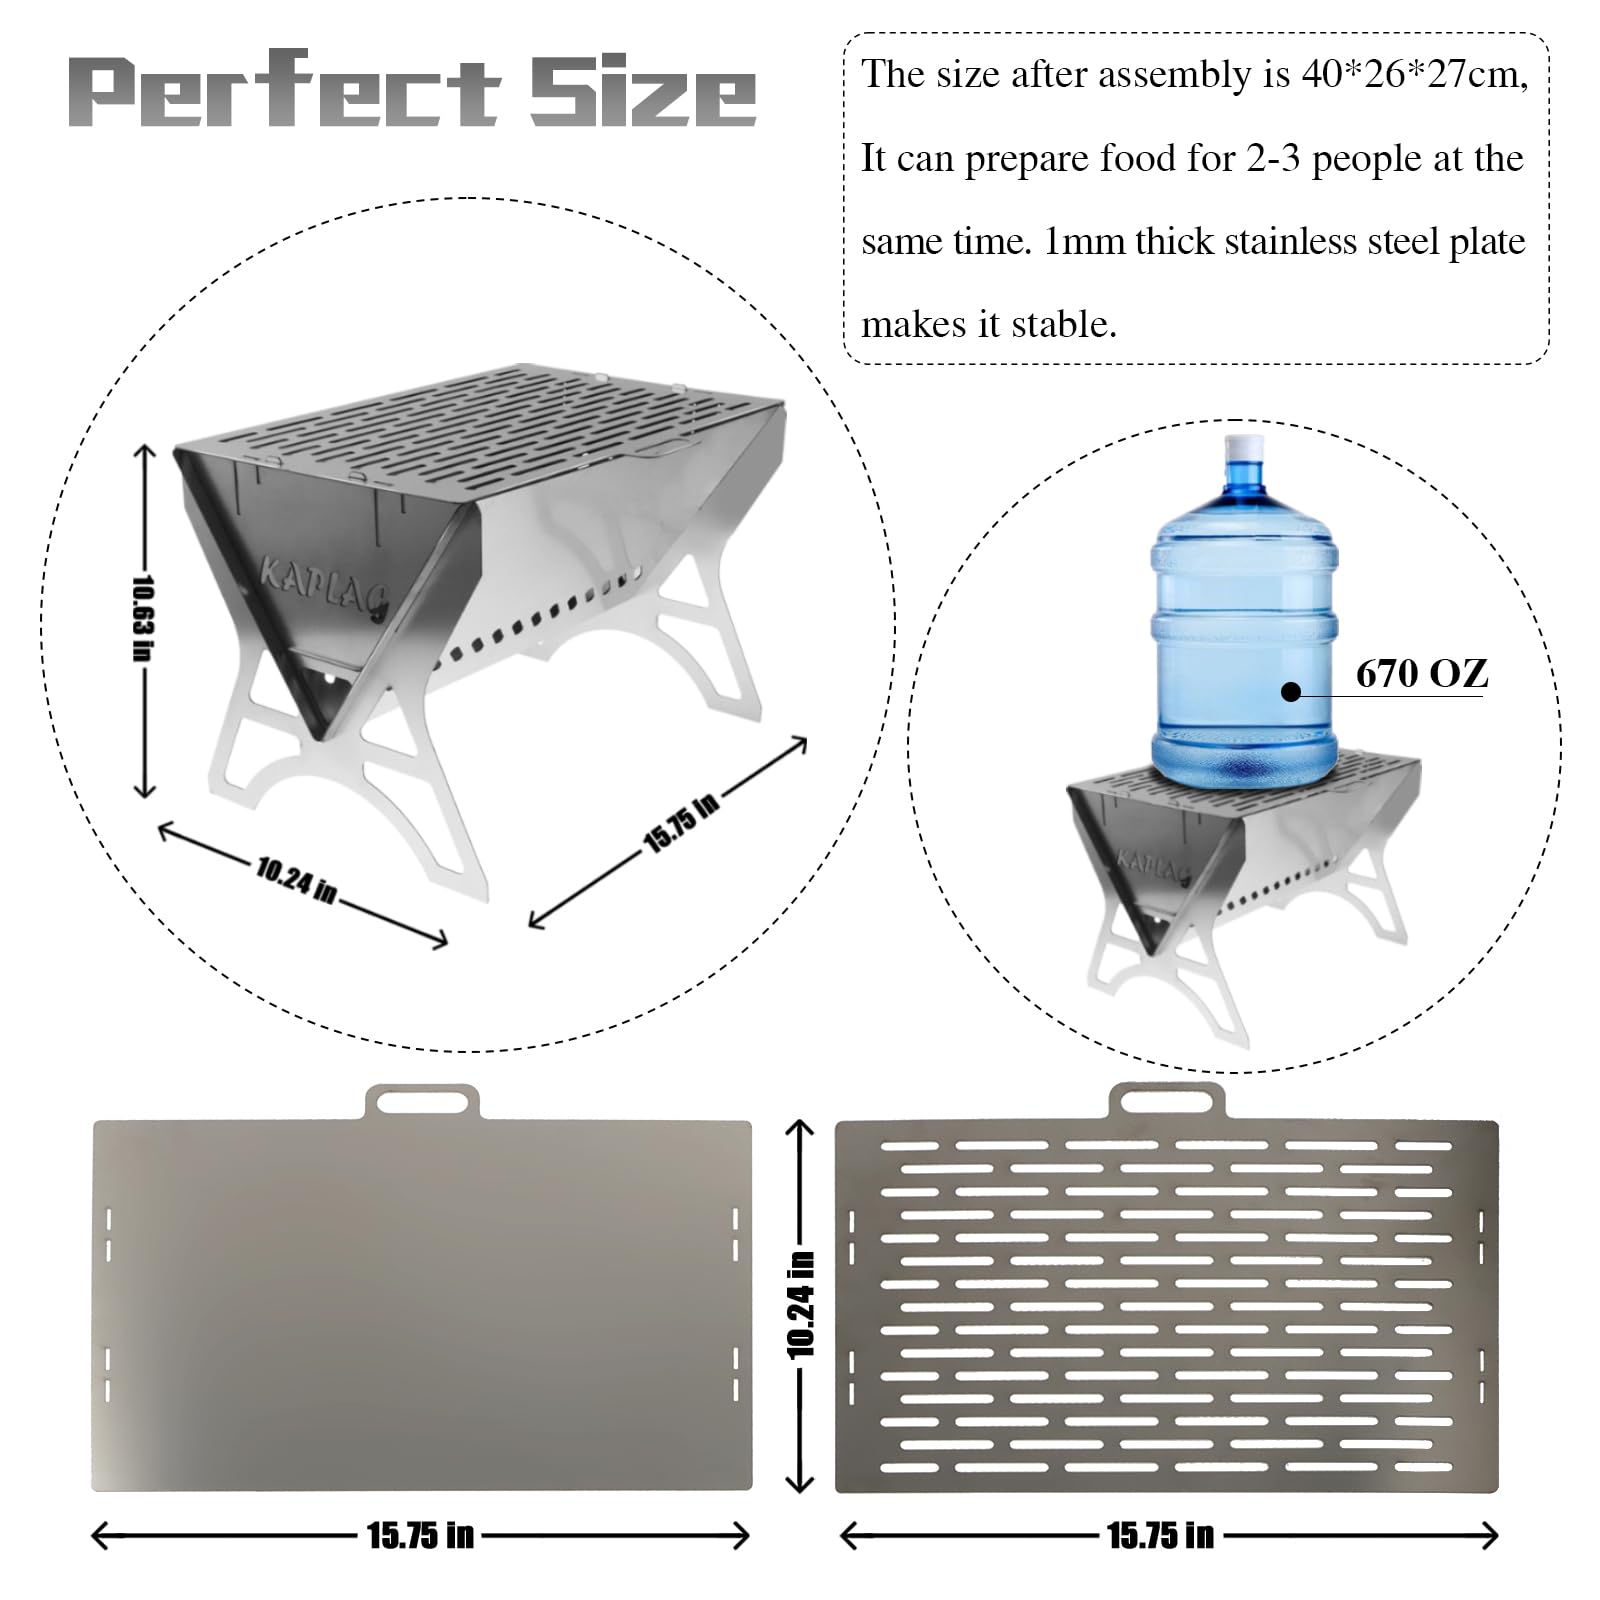 KPALAG Big Size Detachable Charcoal Grill, Portable BBQ Grill, Foldable Camping Fire Grill，Heavy Duty Outdoor Grill Smoker, Fire Pit for Camping, Outdoor Heating, and Picnic With Carry Bag